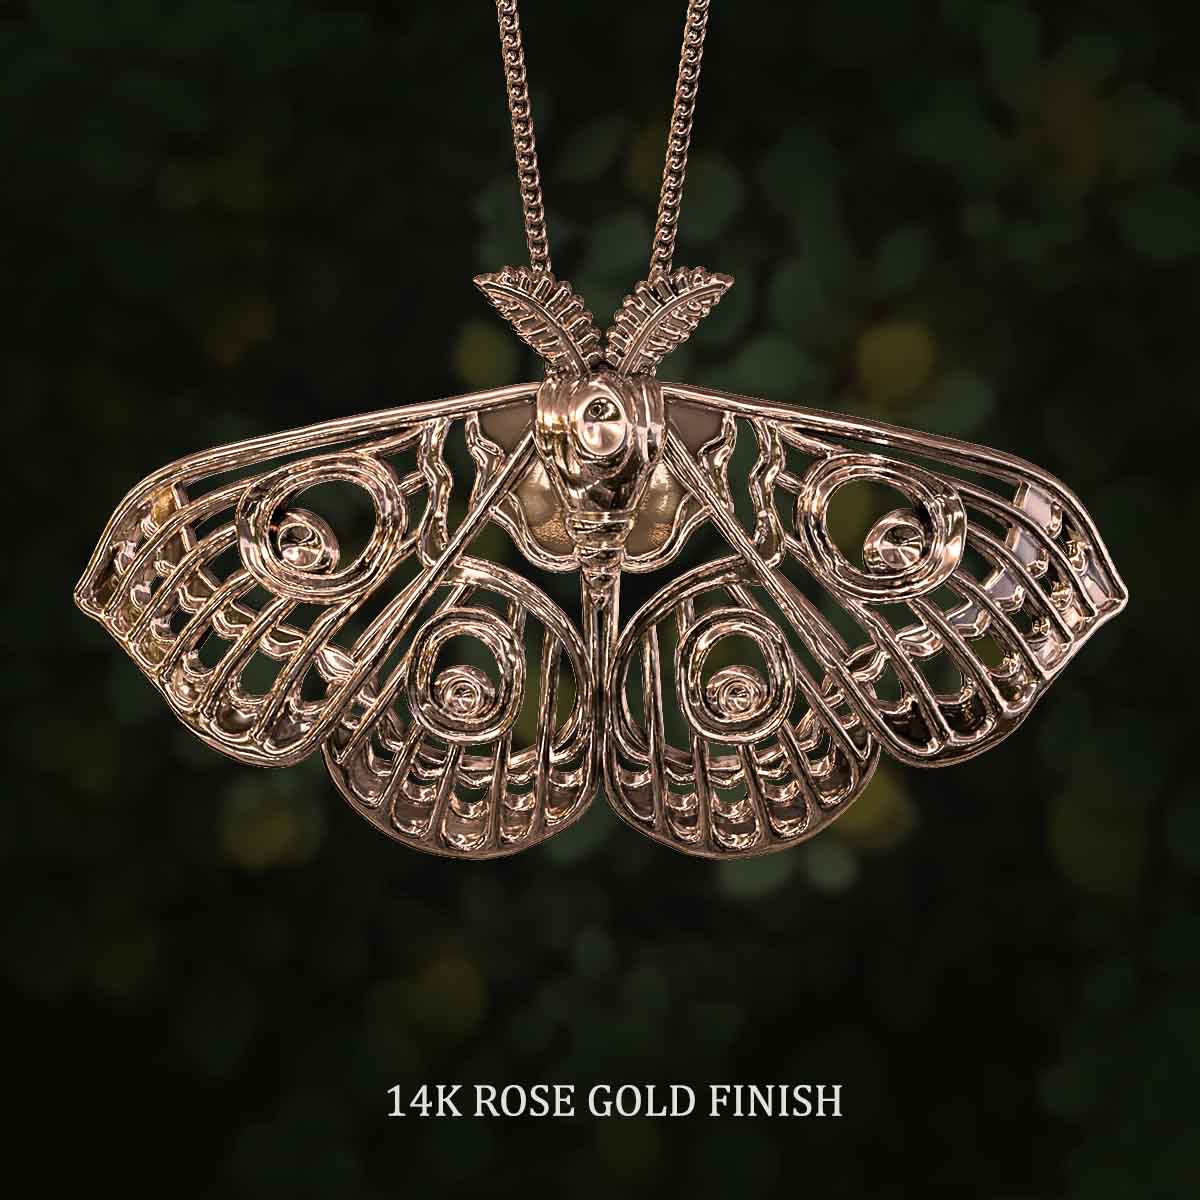     14k-Rose-Gold-Finish-Arabella-Moth-Pendant-Jewelry-For-Necklace